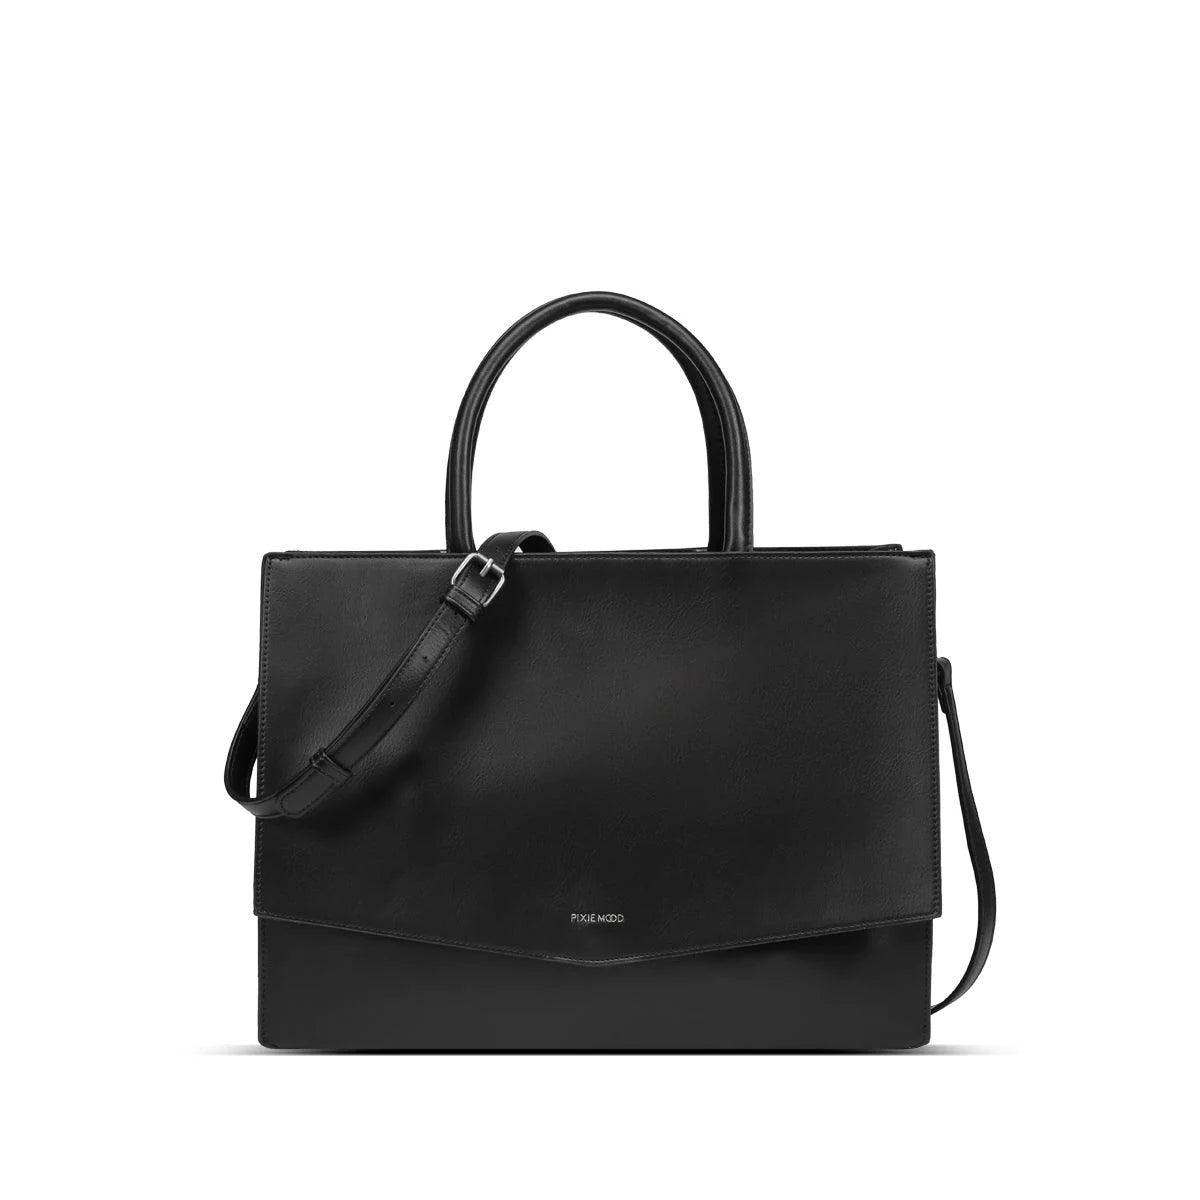 Caitlyn Tote - Large